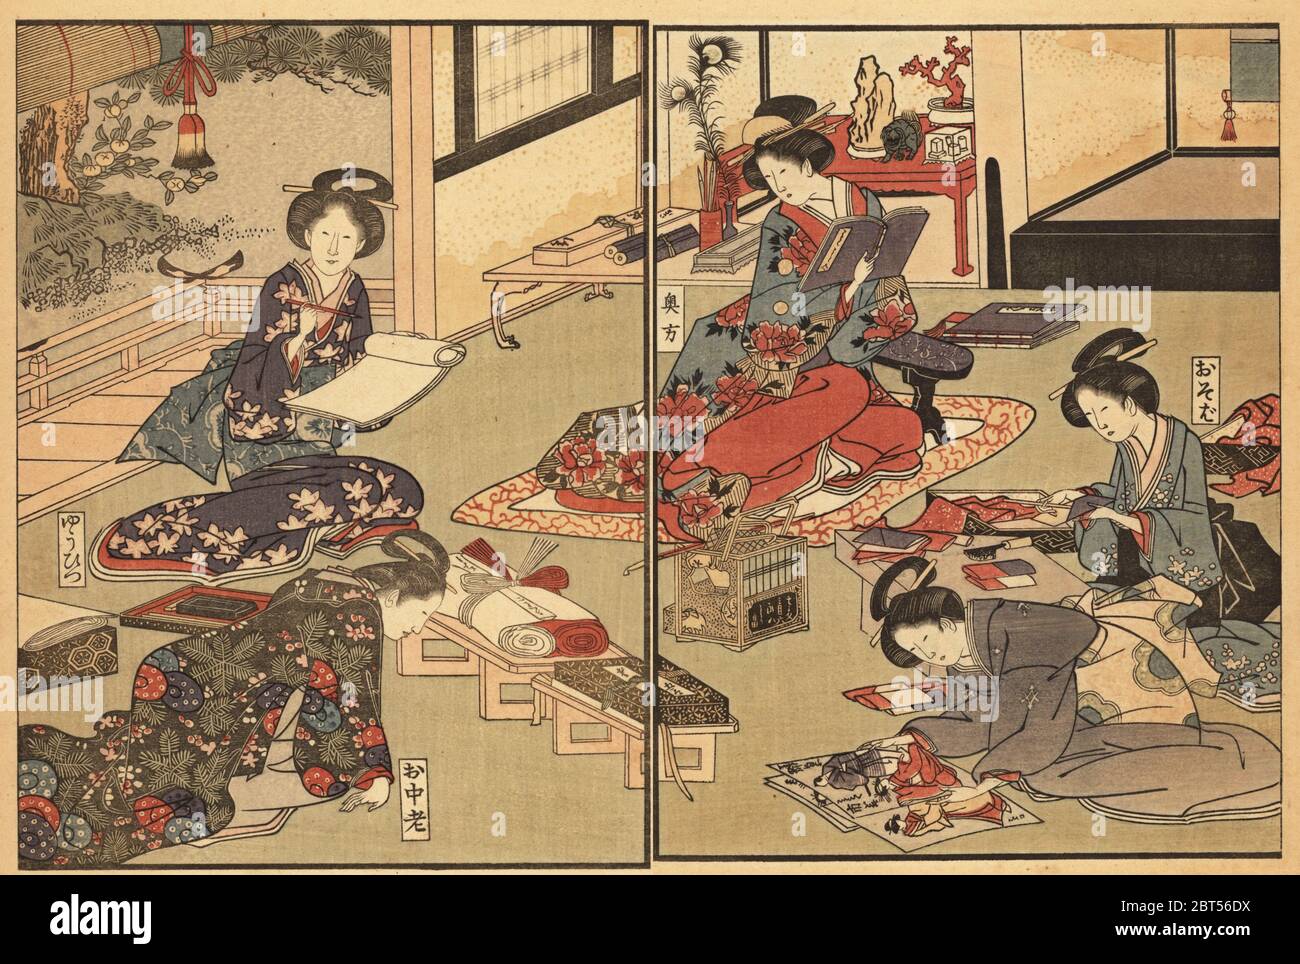 Wife of the elite samurai class reading books, with other women writing with a pen, one looking at ukiyo-e prints, and one folding paper. Another woman delivers reams of paper and ink. The alcove is decorated with coral, scrolls, feathers, etc. Handcoloured ukiyo-e woodblock print by Toyokuni Utagawa from Shikitei Sanbas Ehon Imayo Sugata (Picture Book of the Modern Forms and Figures, Tokyo, 1916. Reprint of the original from 1802. Stock Photo